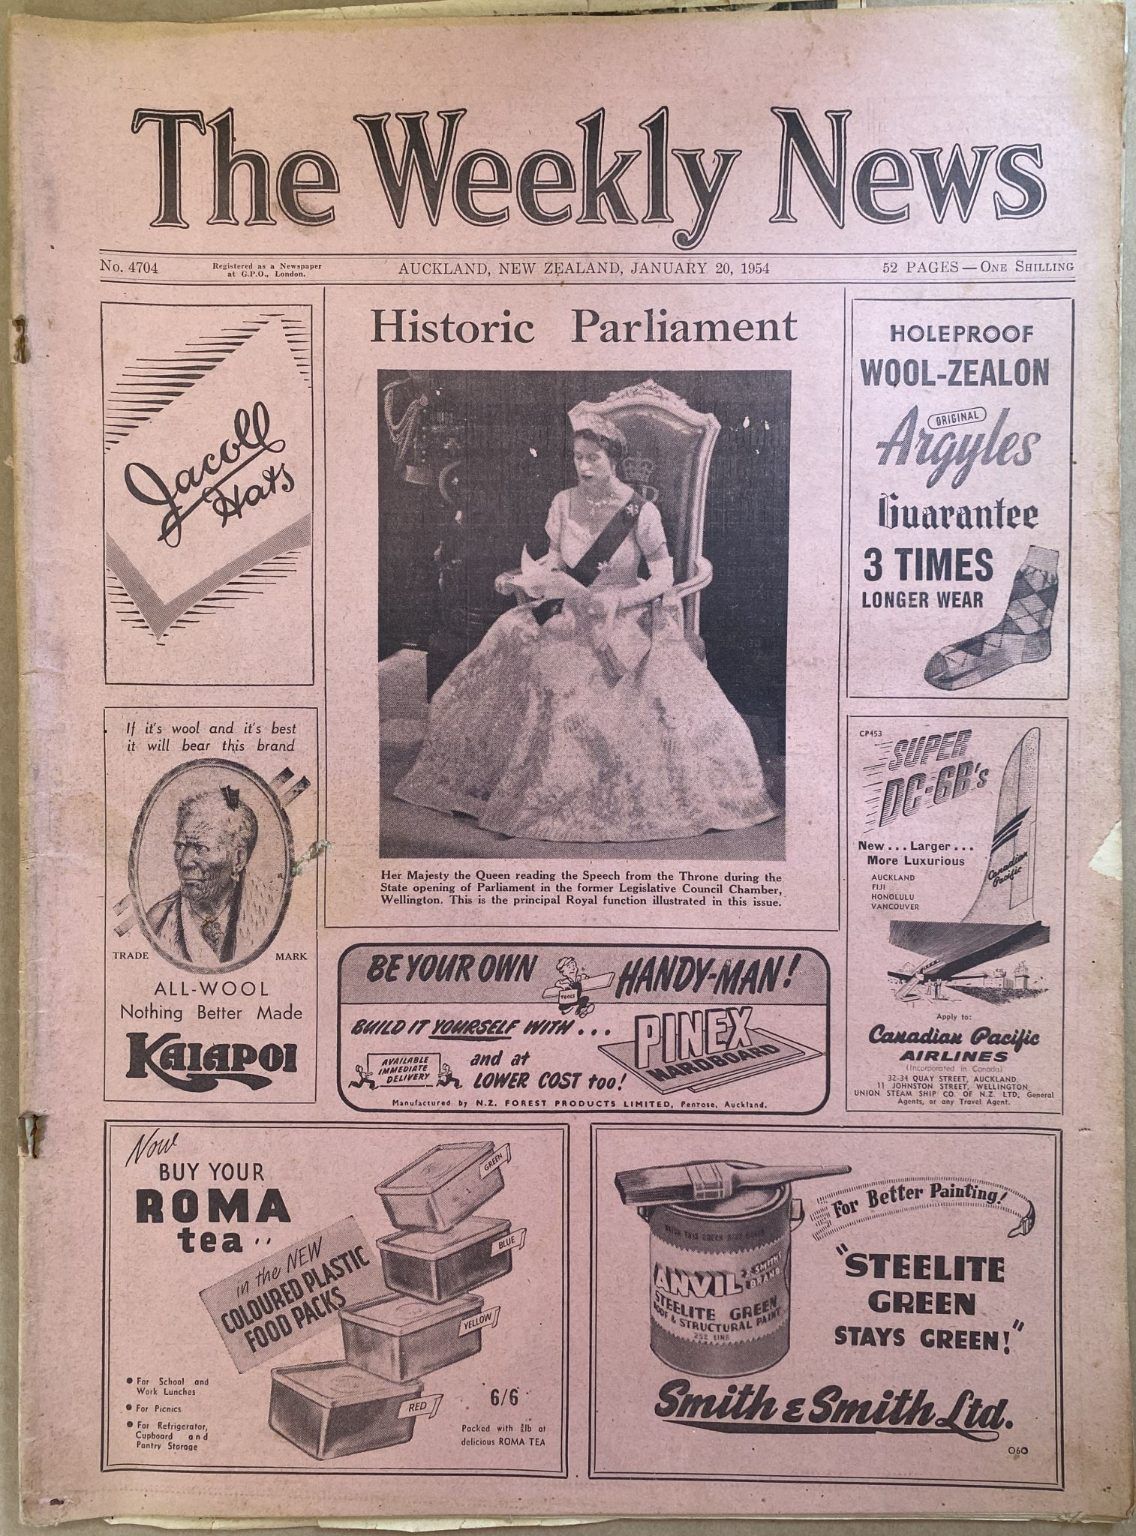 OLD NEWSPAPER: The Weekly News - No. 4704, 20 January 1954